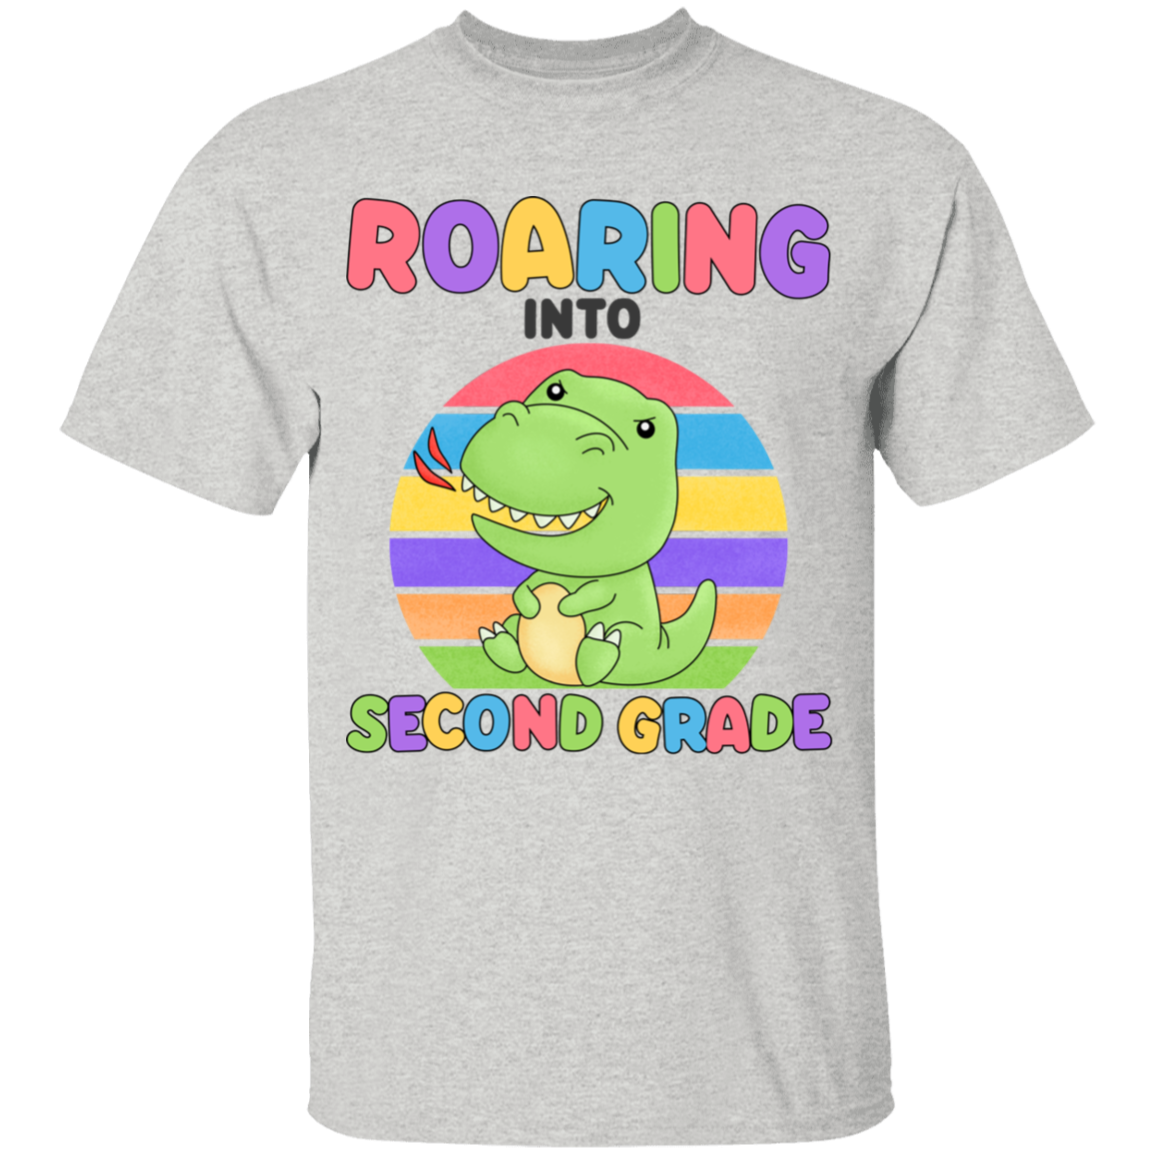 Roaring Into Second Grade Youth Cotton T-Shirt